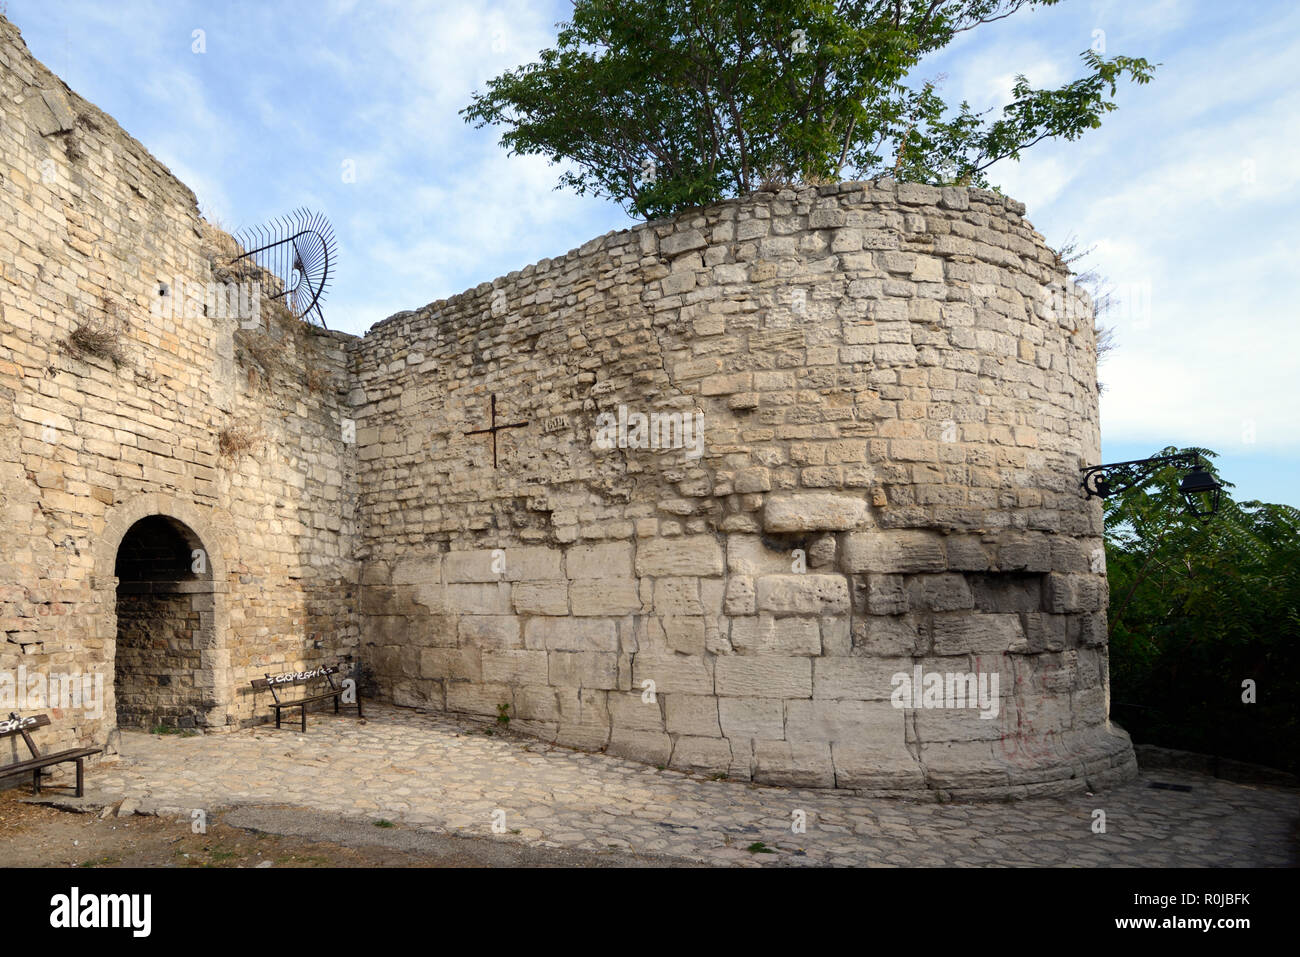 Antique Roman Wall or City Walls & Town Gate Arles Provence France Stock Photo